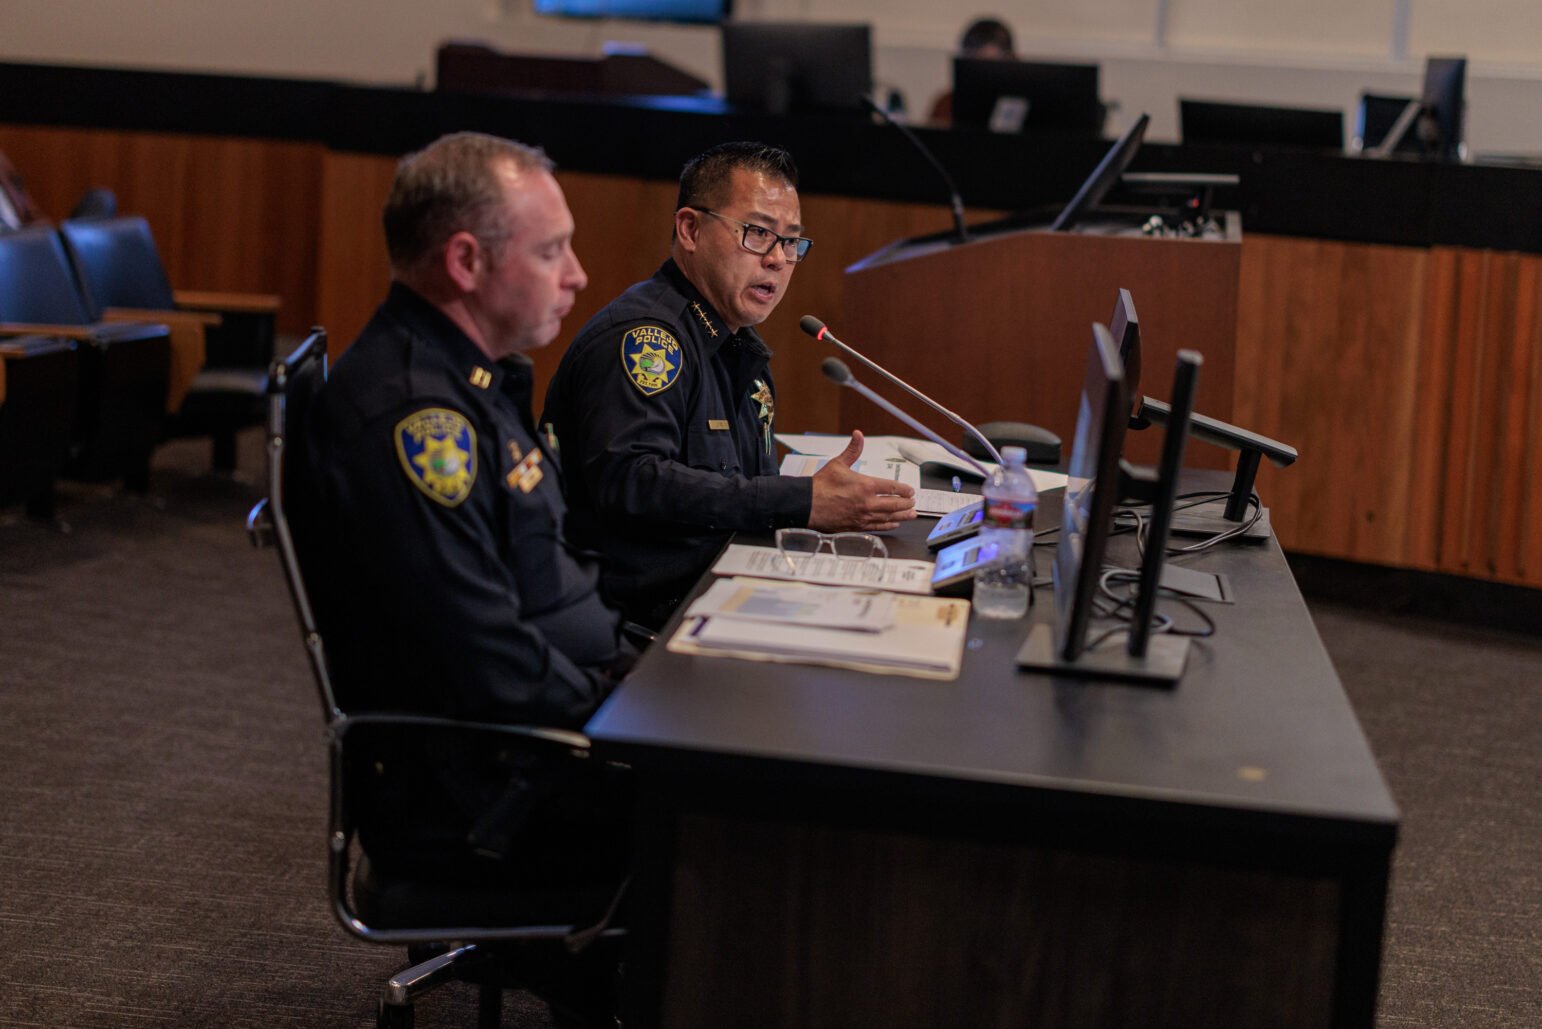 Two police officers are seated at a desk in a council chamber, addressing a public meeting. The officer speaking is wearing glasses and gesturing with his hands, with a microphone in front of him, while his colleague looks on. They are in uniform with badges visible.